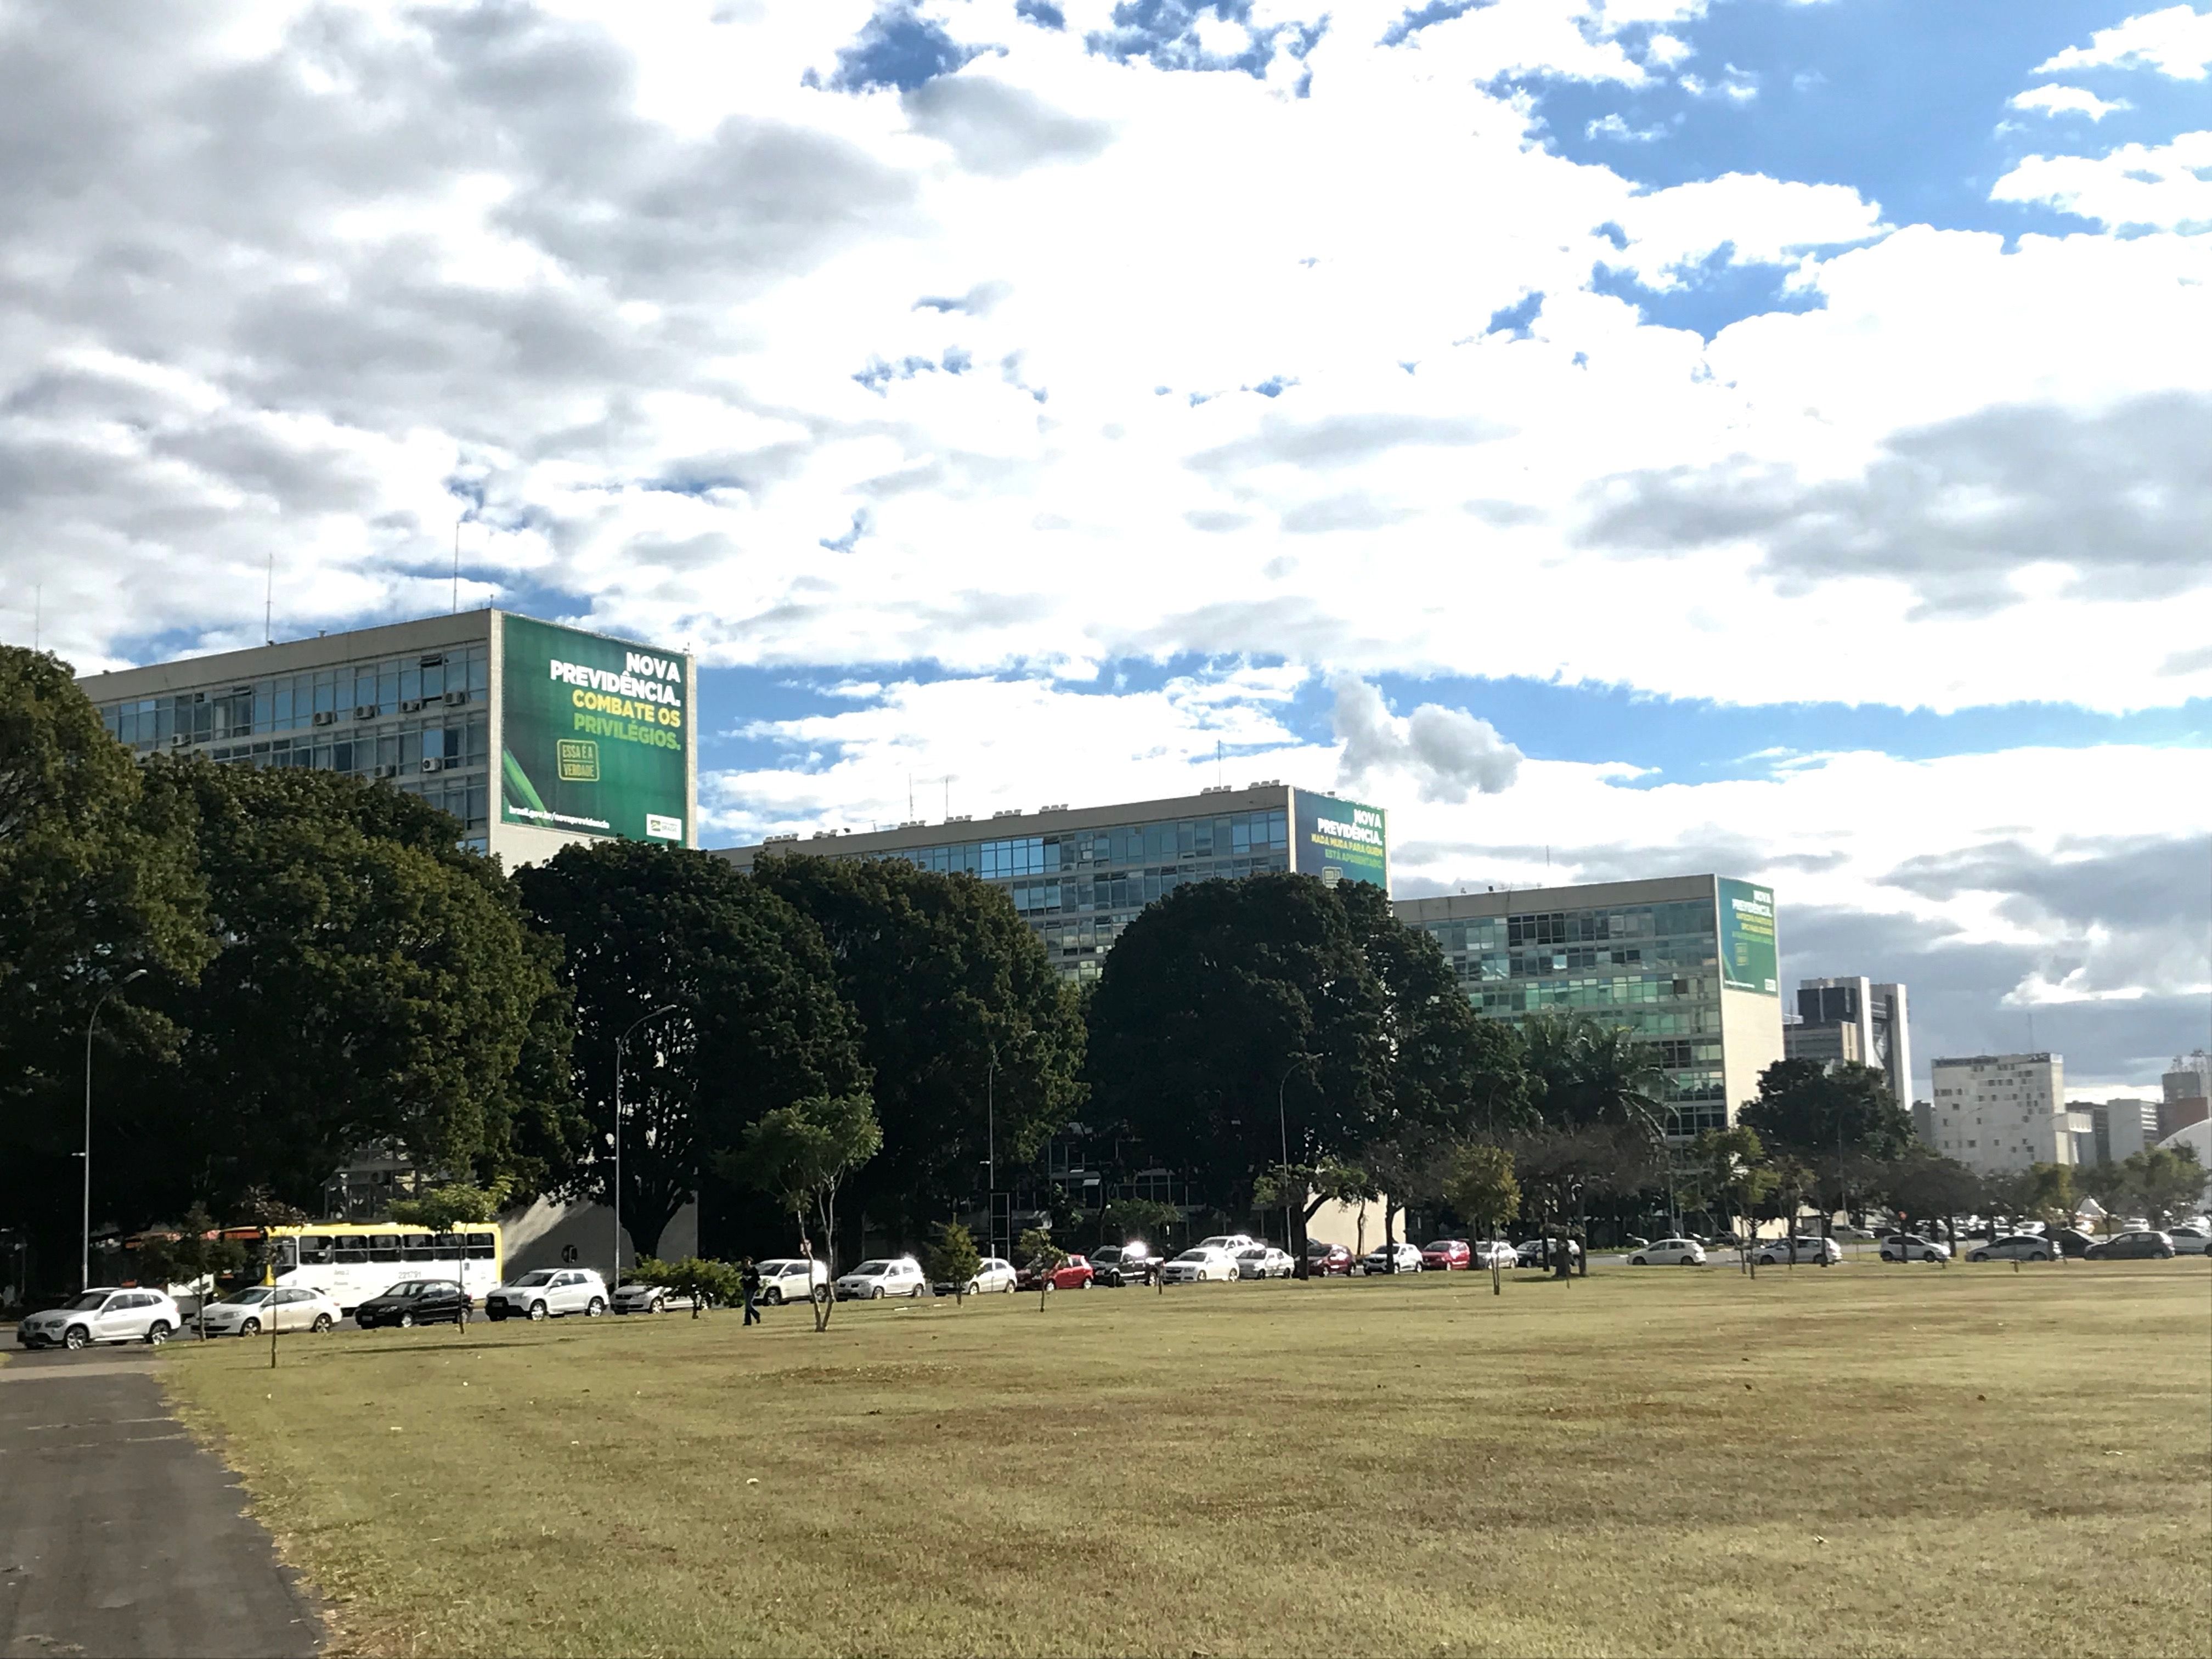 As part of an unprecedented marketing strategy, the government under Bolsonaro decided to put billboards showing the benefits of their unpopular social security reform in front of each ministry building. This is the first time in Brazil’s history that the ministries were used for marketing purposes. Image by Rafael Lima. Brazil, 2019.